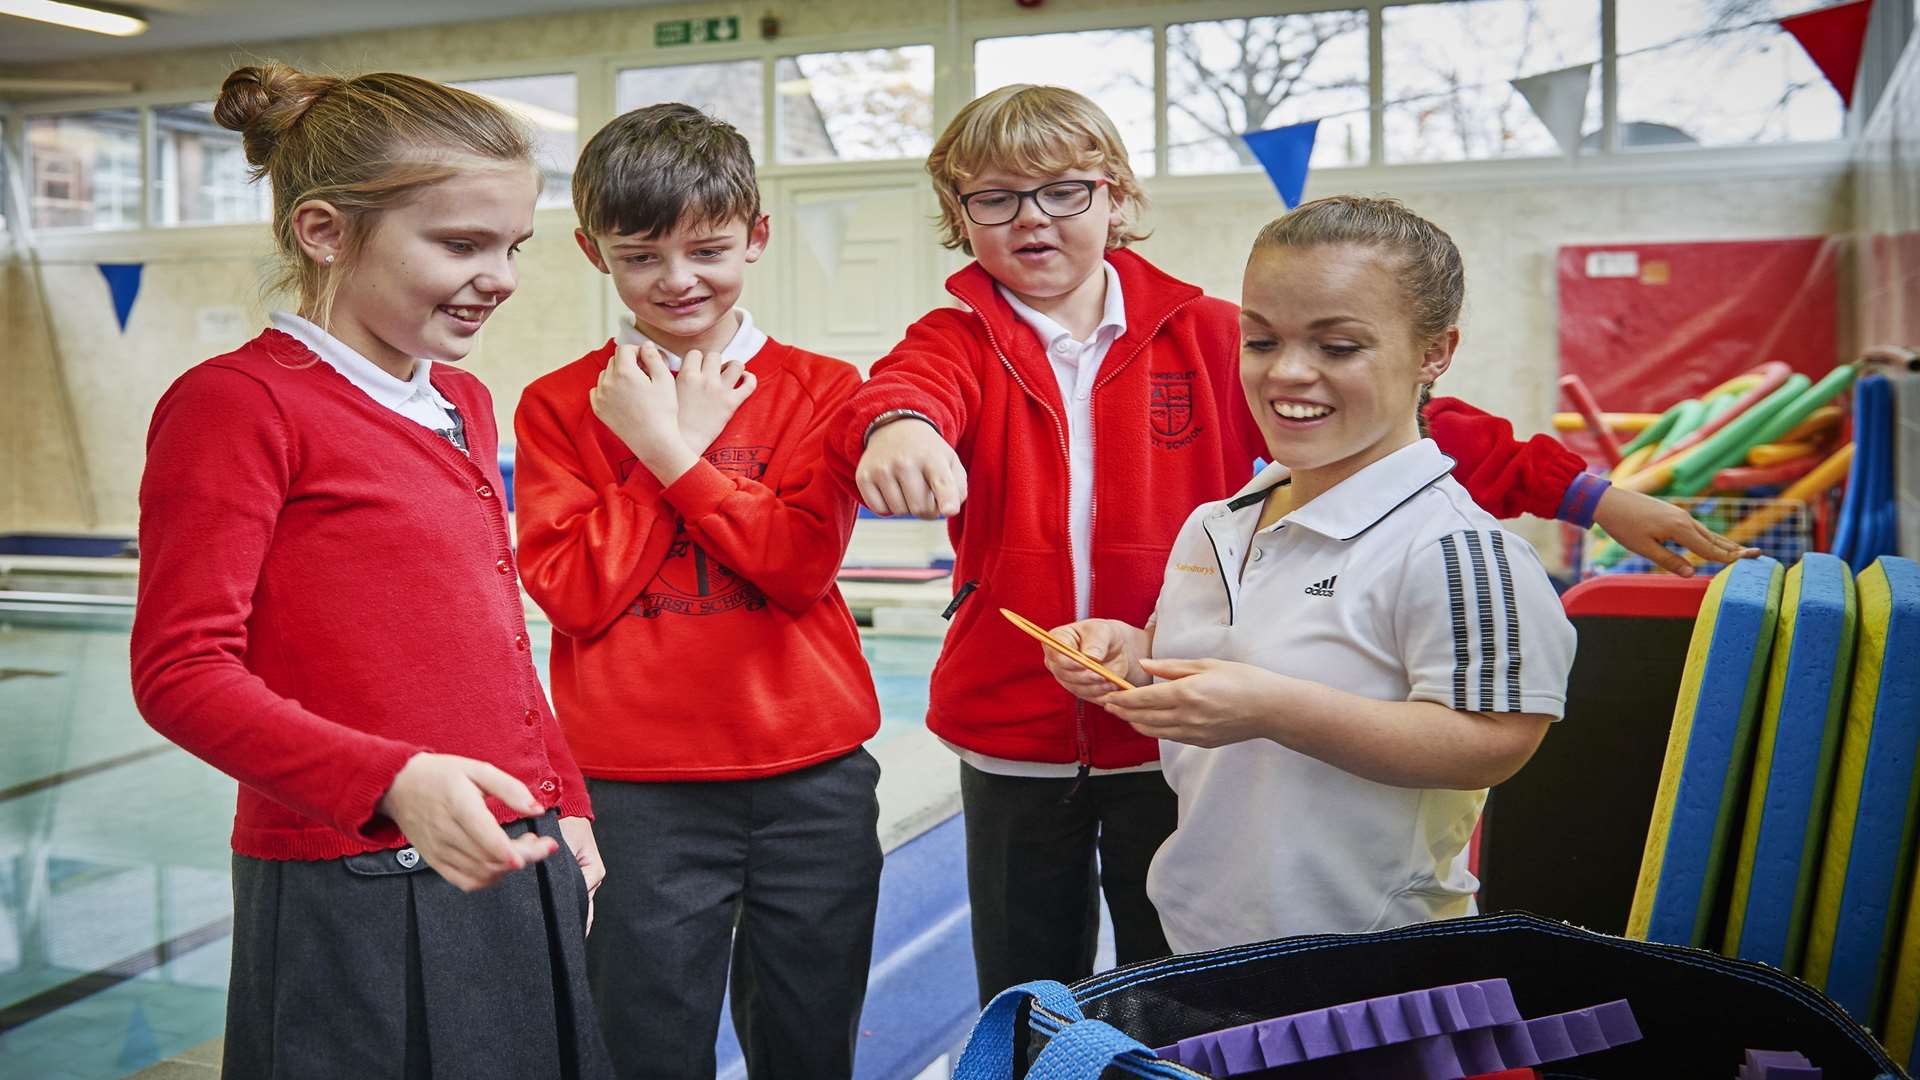 Quadruple Paralympic gold medal swimmer Ellie Simmonds is an ambassador for Sainsbury's Active Kids